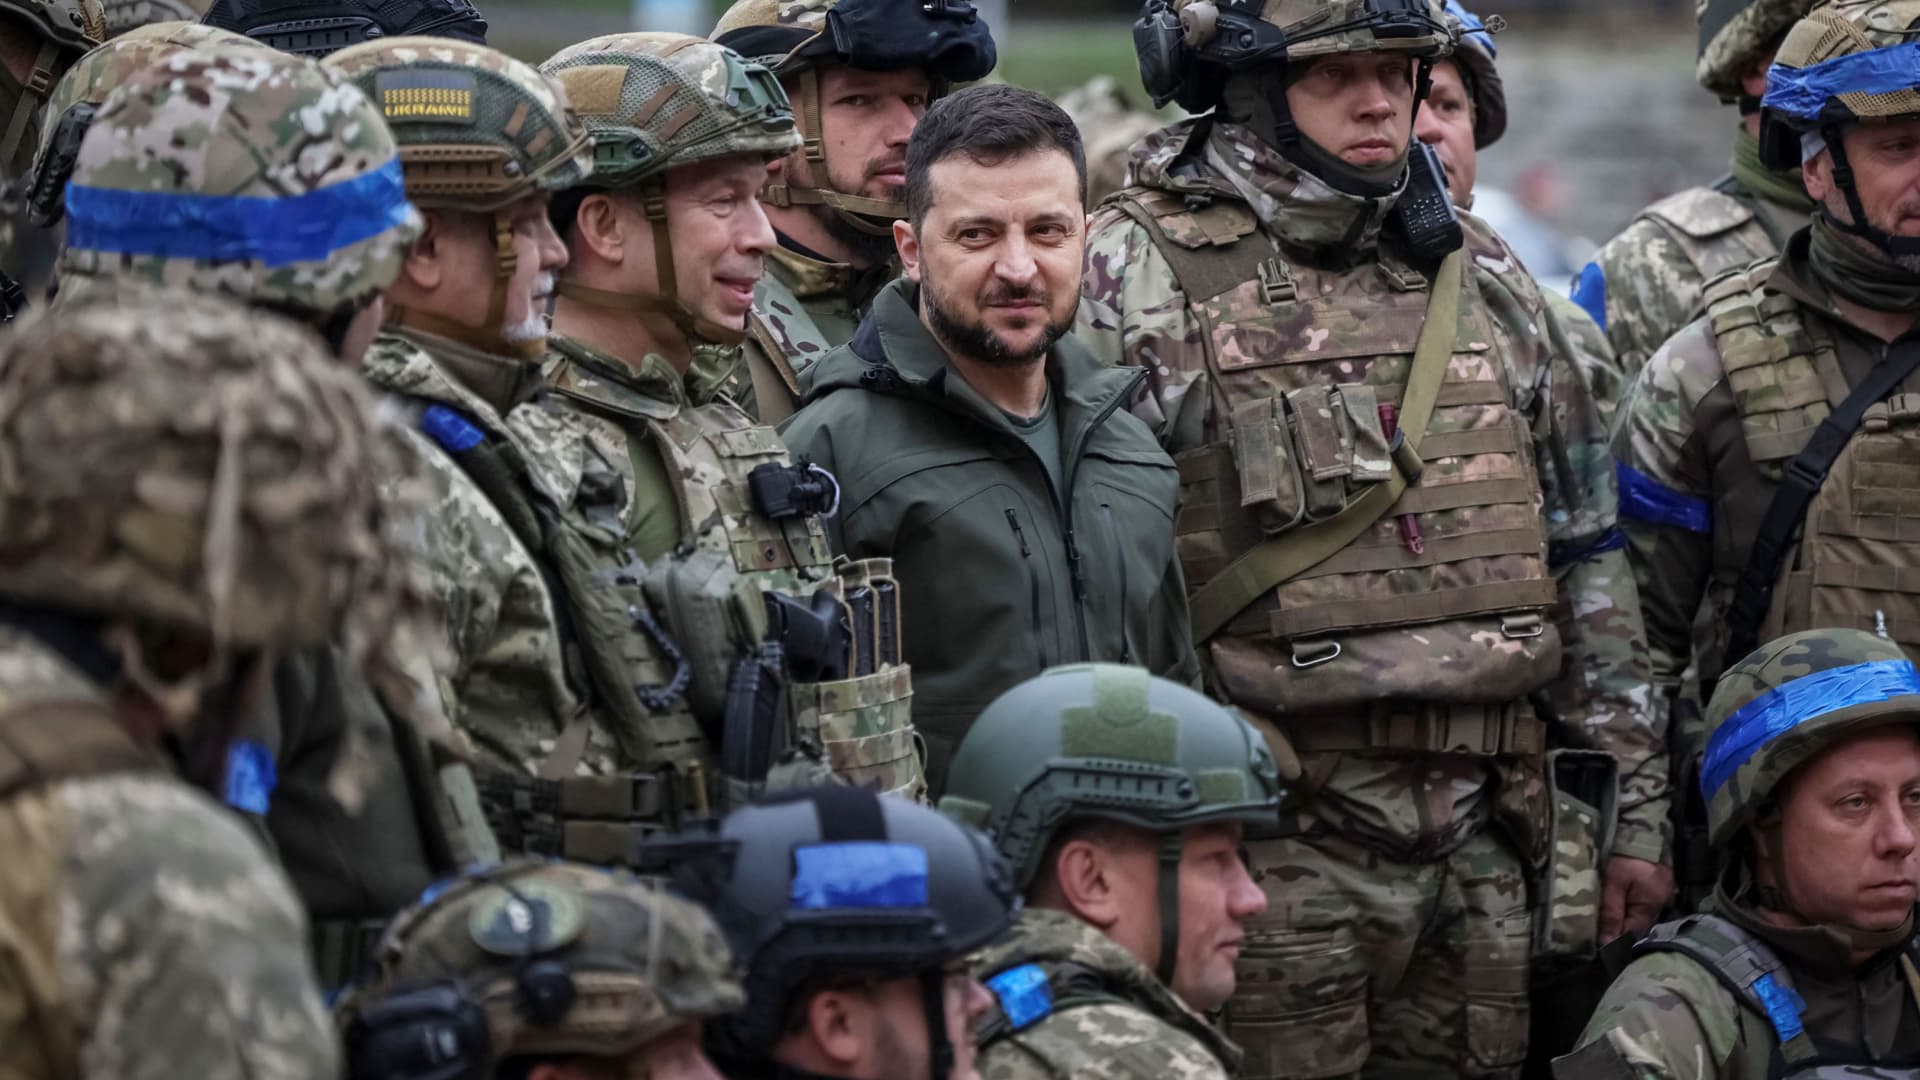 Ukraine's President Volodymyr Zelenskyy poses for a pictures with Ukrainian servicemen as he visits the town of Izium, recently liberated by Ukraine's armed forces, in the Kharkiv region of Ukraine on Sept. 14, 2022.